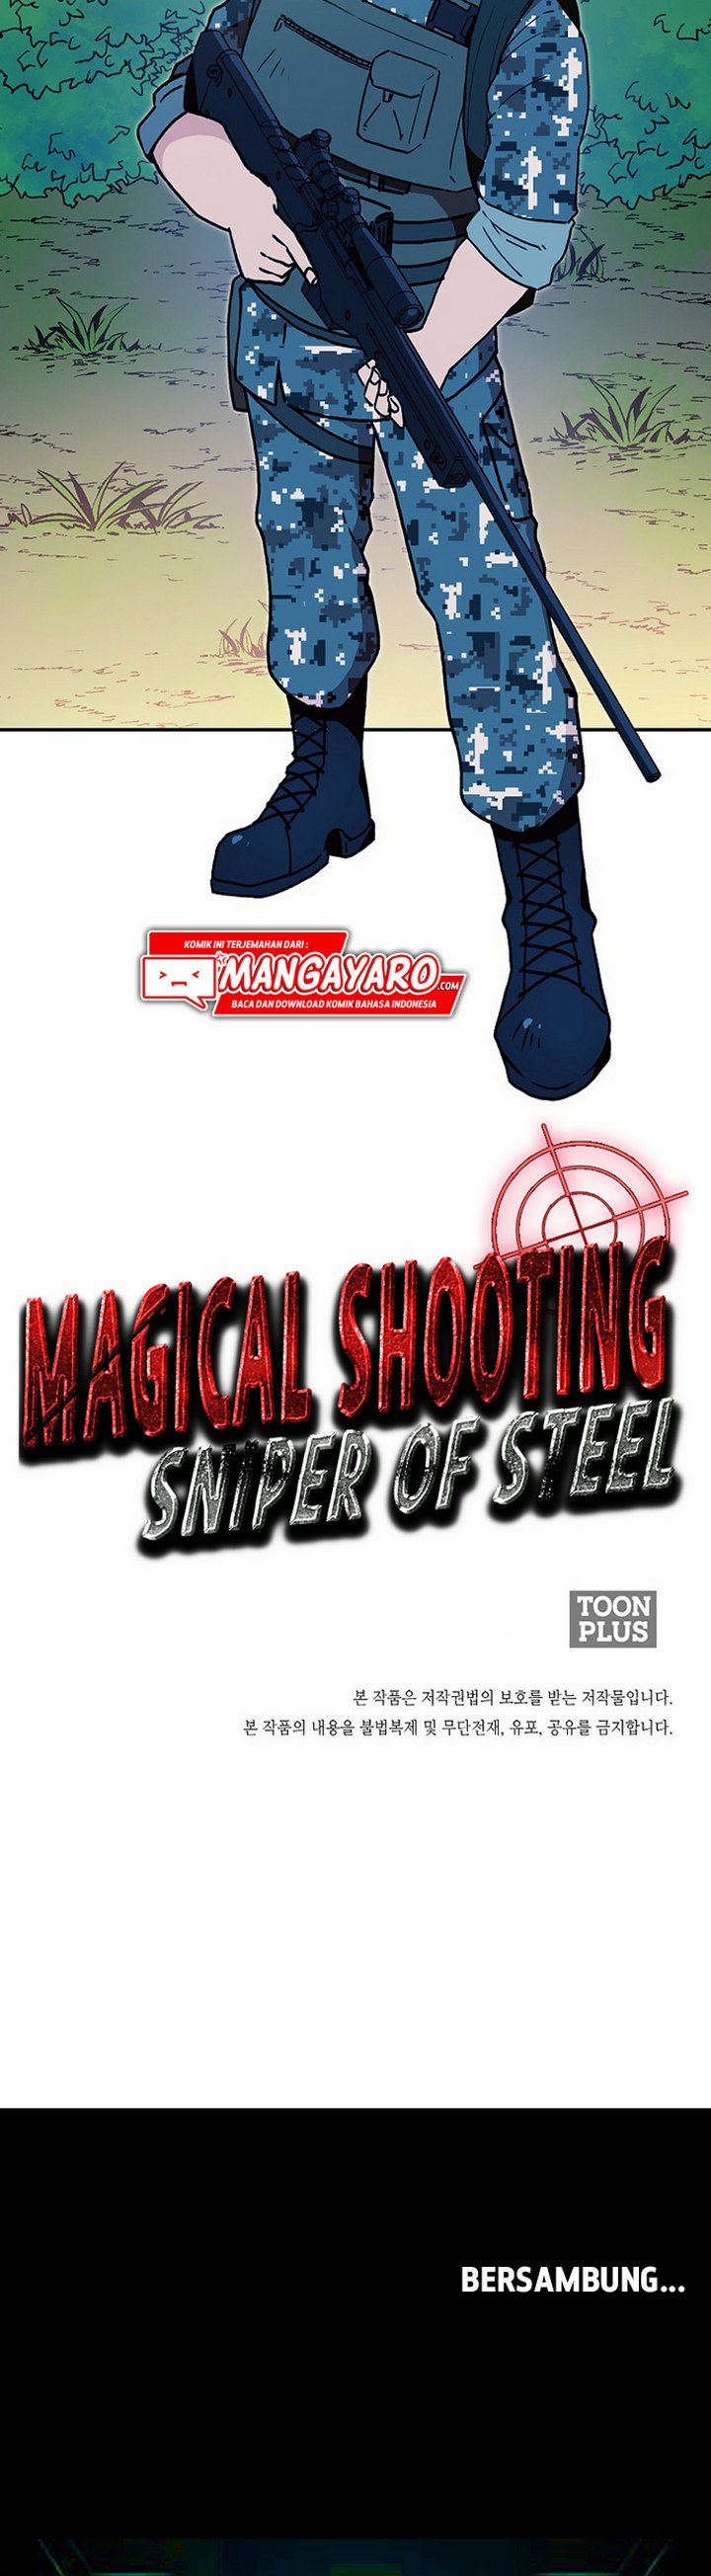 Magical Shooting: Sniper of Steel Chapter 13.2